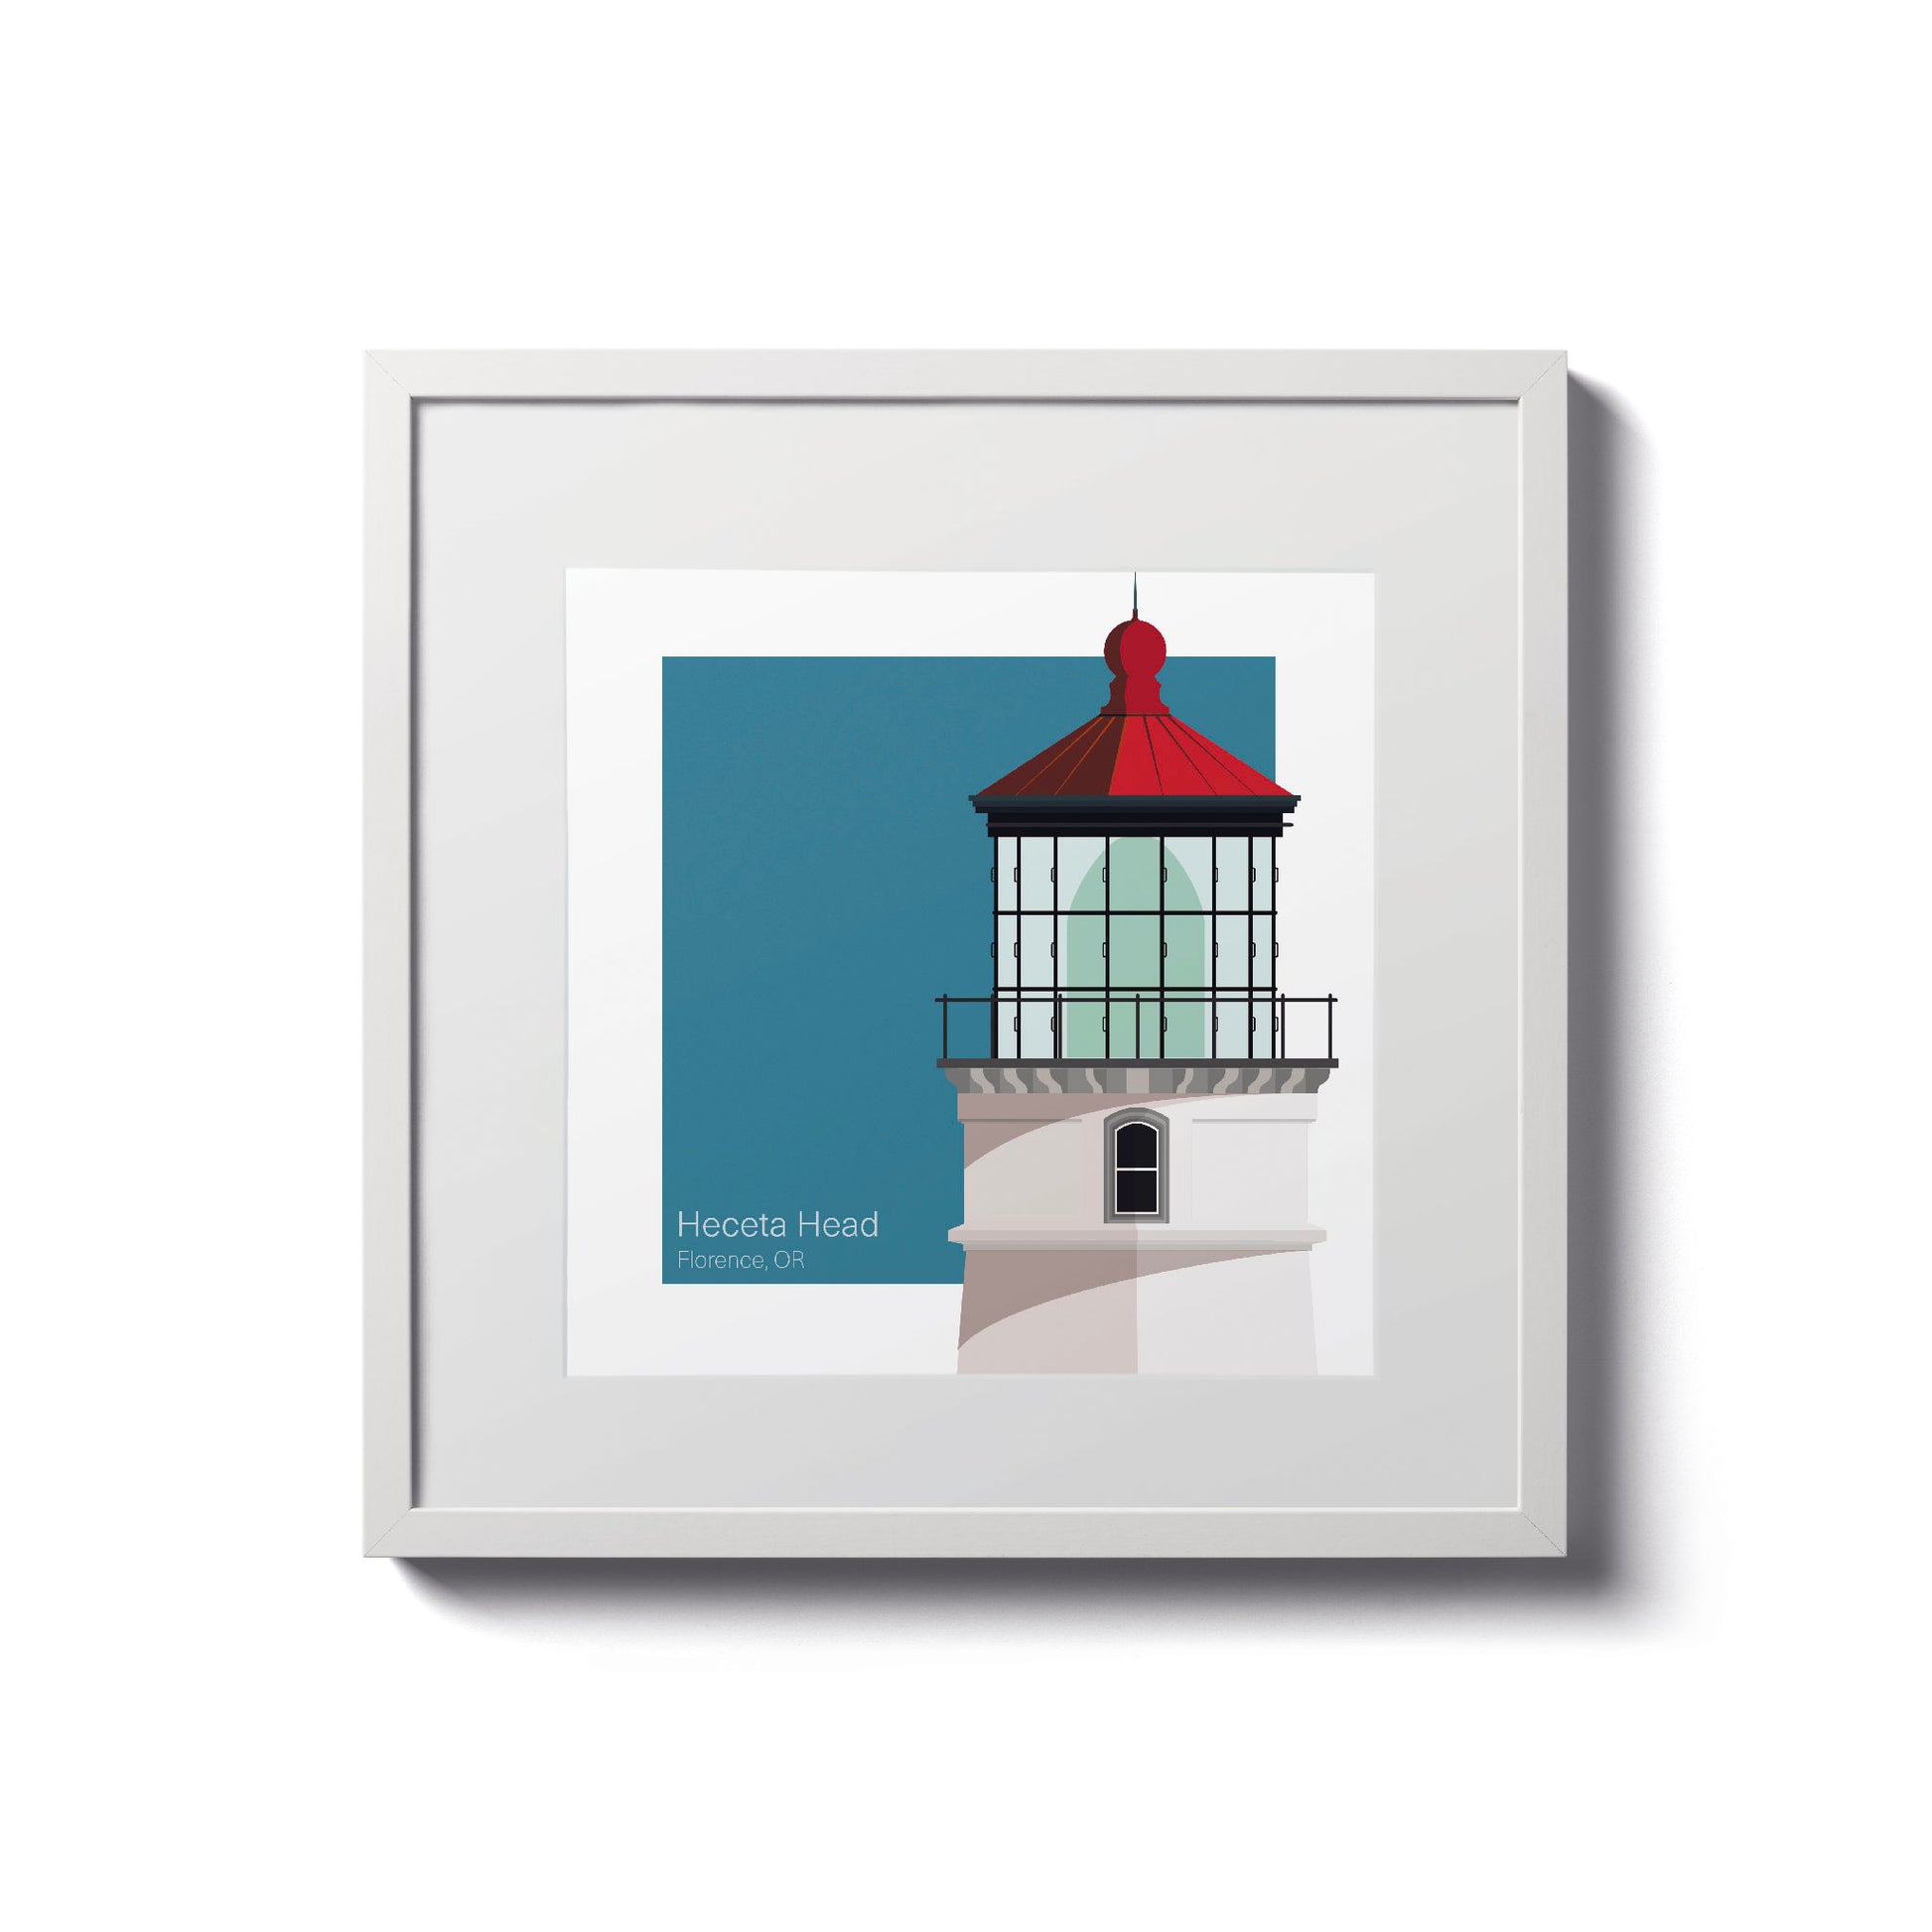 Illustration of the Heceta Head lighthouse, OR, USA. On a white background with aqua blue square as a backdrop., in a white frame  and measuring 8"x8" (20x20cm).